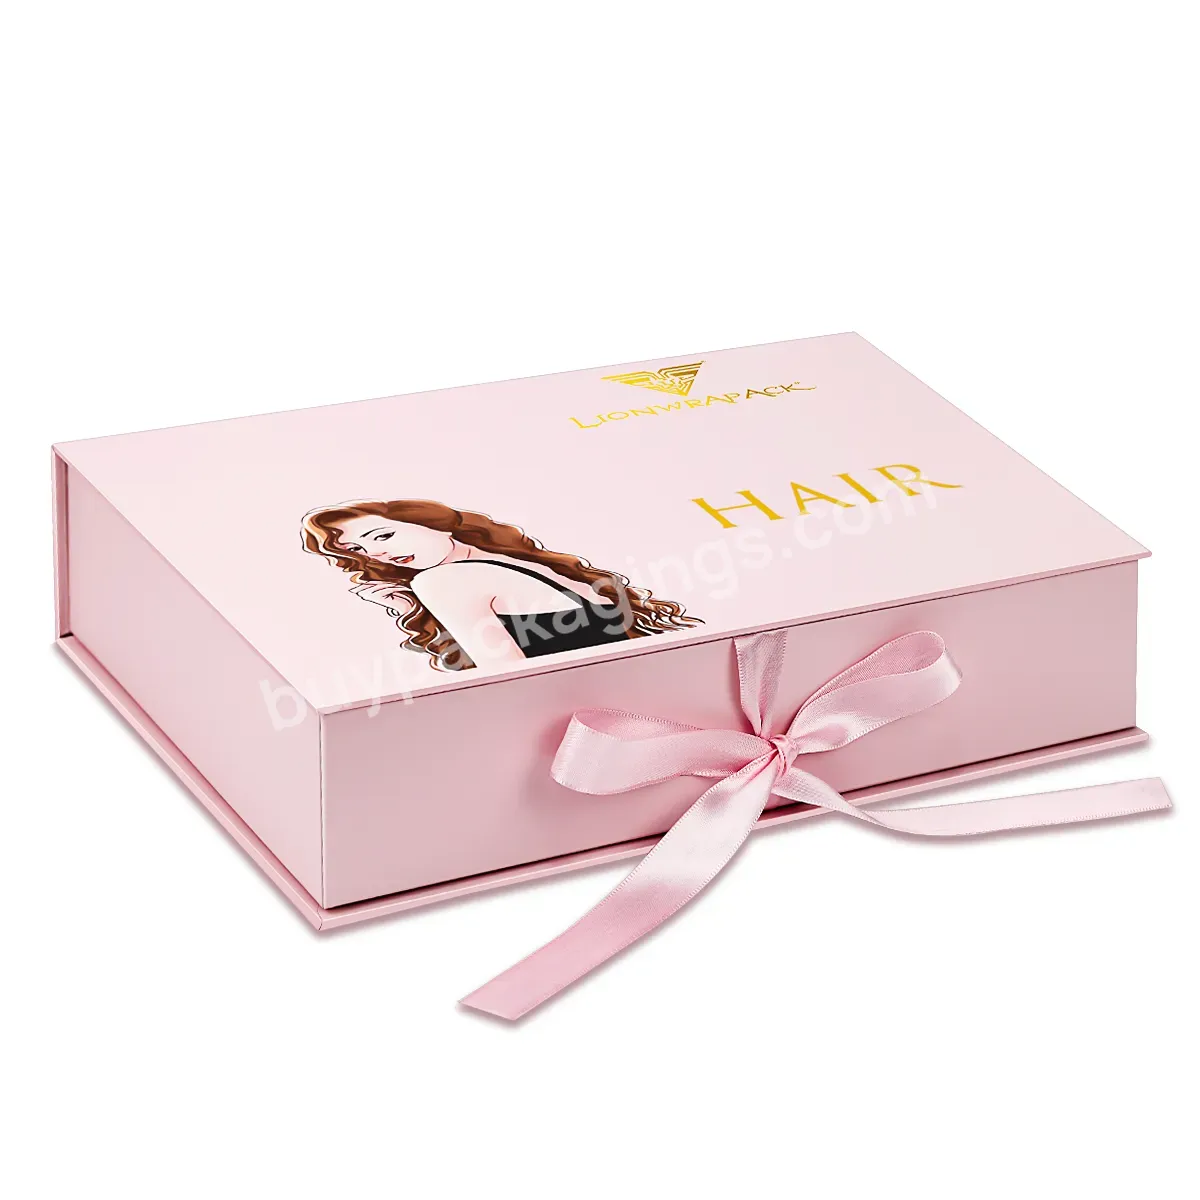 Wholesale Hair Extension Boxes Gift Bundles Packaging Boxes Pink Wig Packaging Box With Custom Logo - Buy Wig Box,Custom Hair Packaging Boxes,Bundles Wig Packaging.